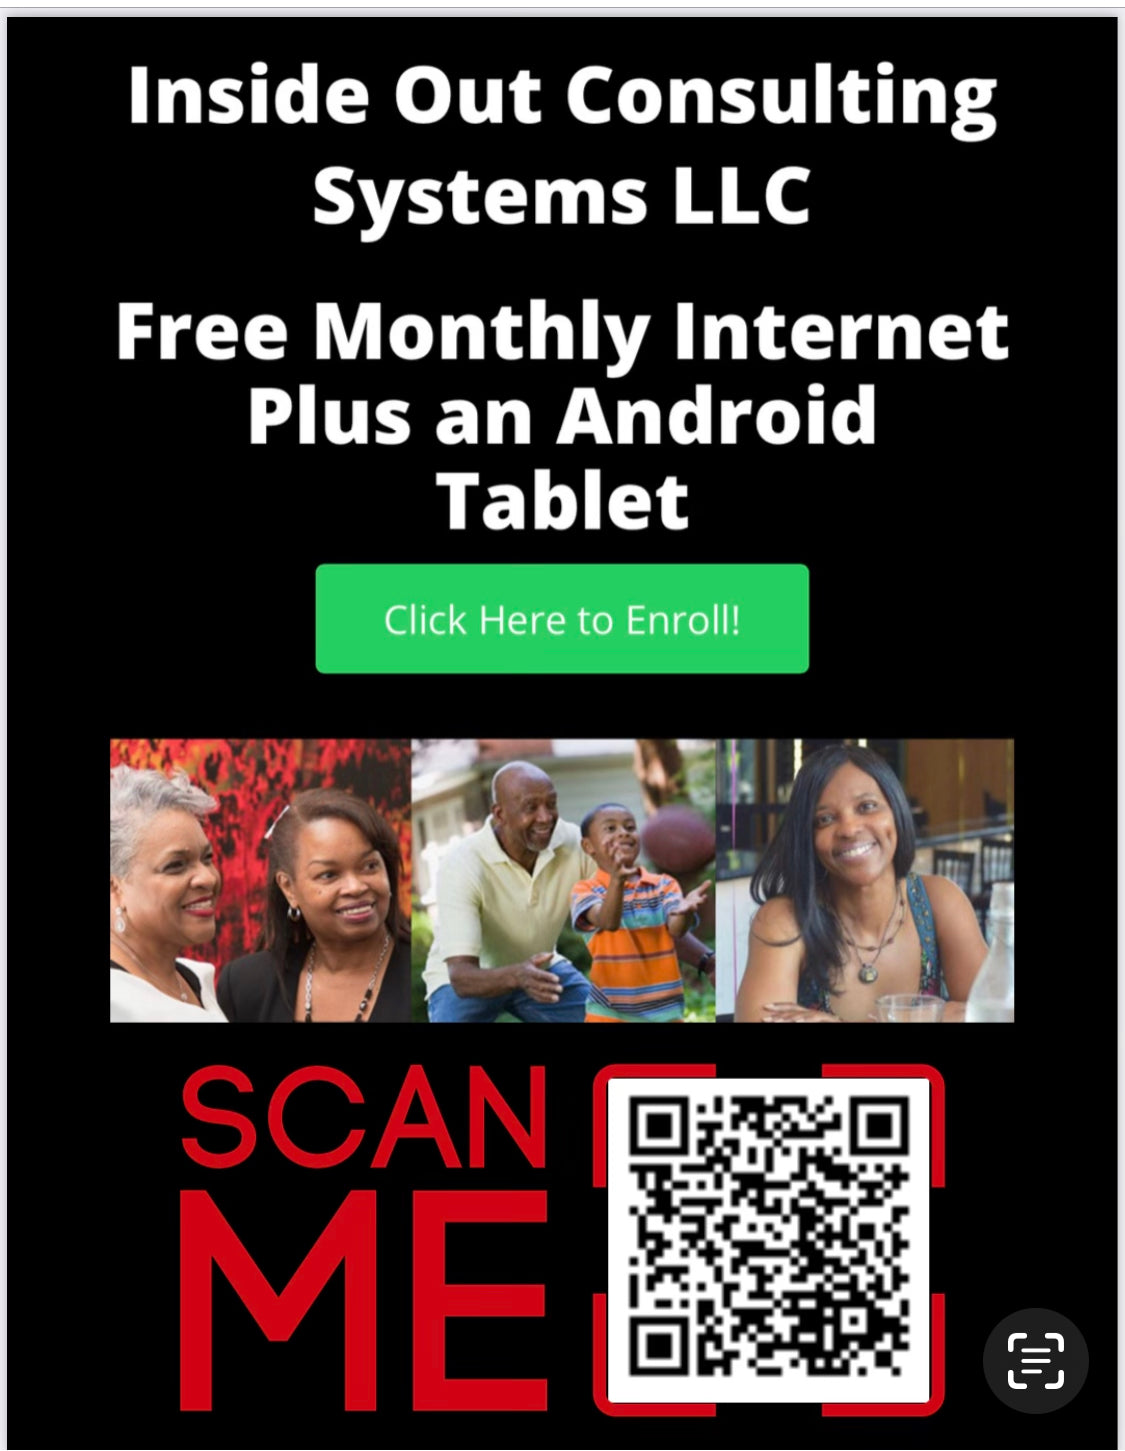 Free Mobile Monthly Internet Plus an Android Tablet ACP Program